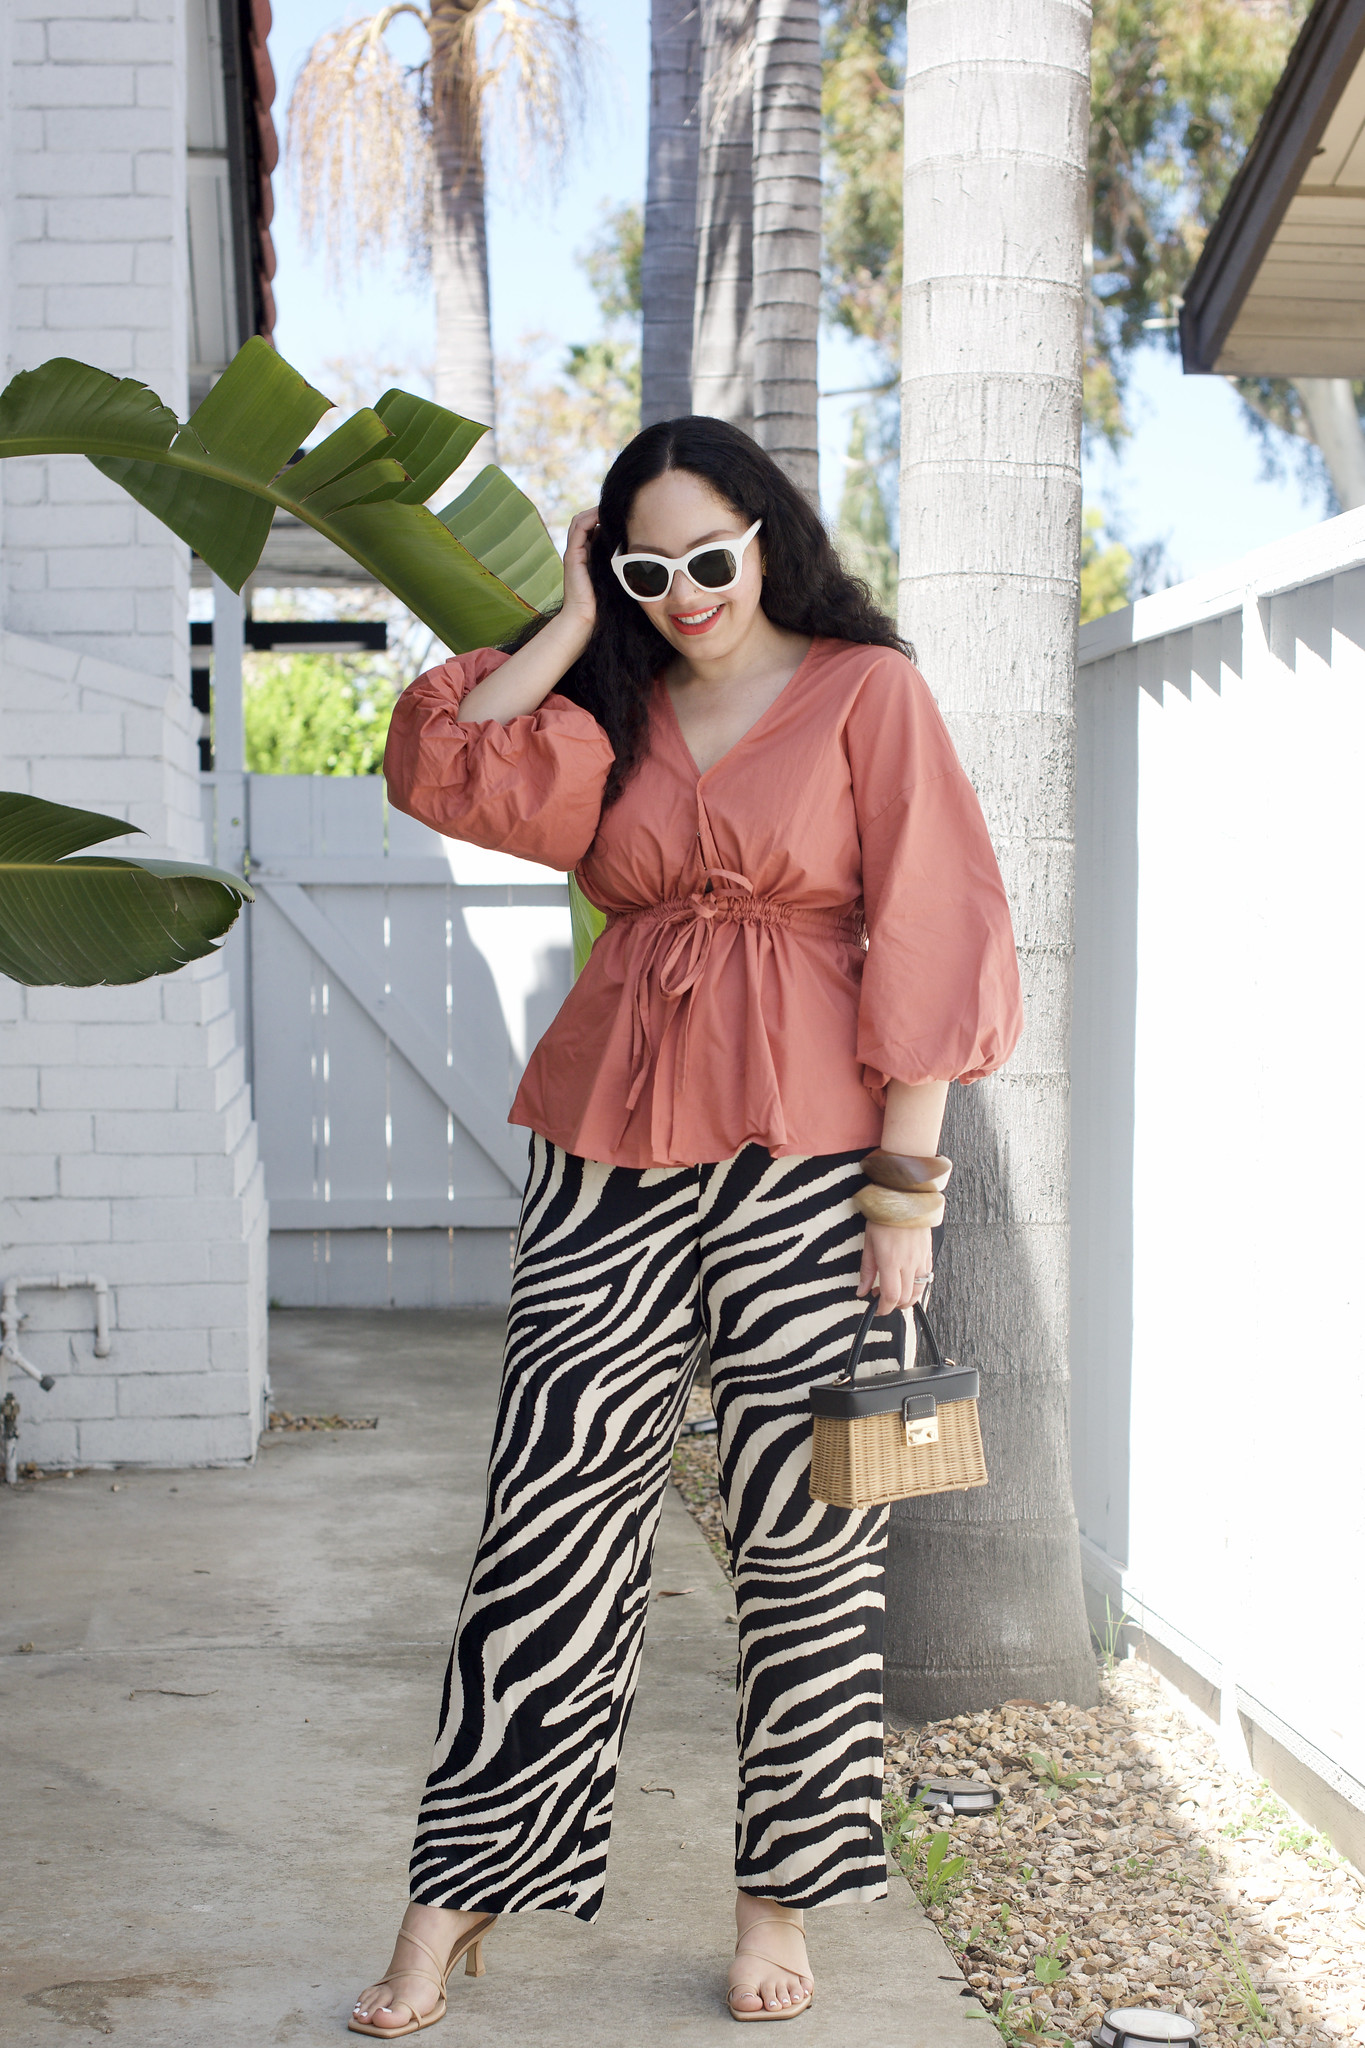 How I'm Styling Printed Pants | Girl With Curves